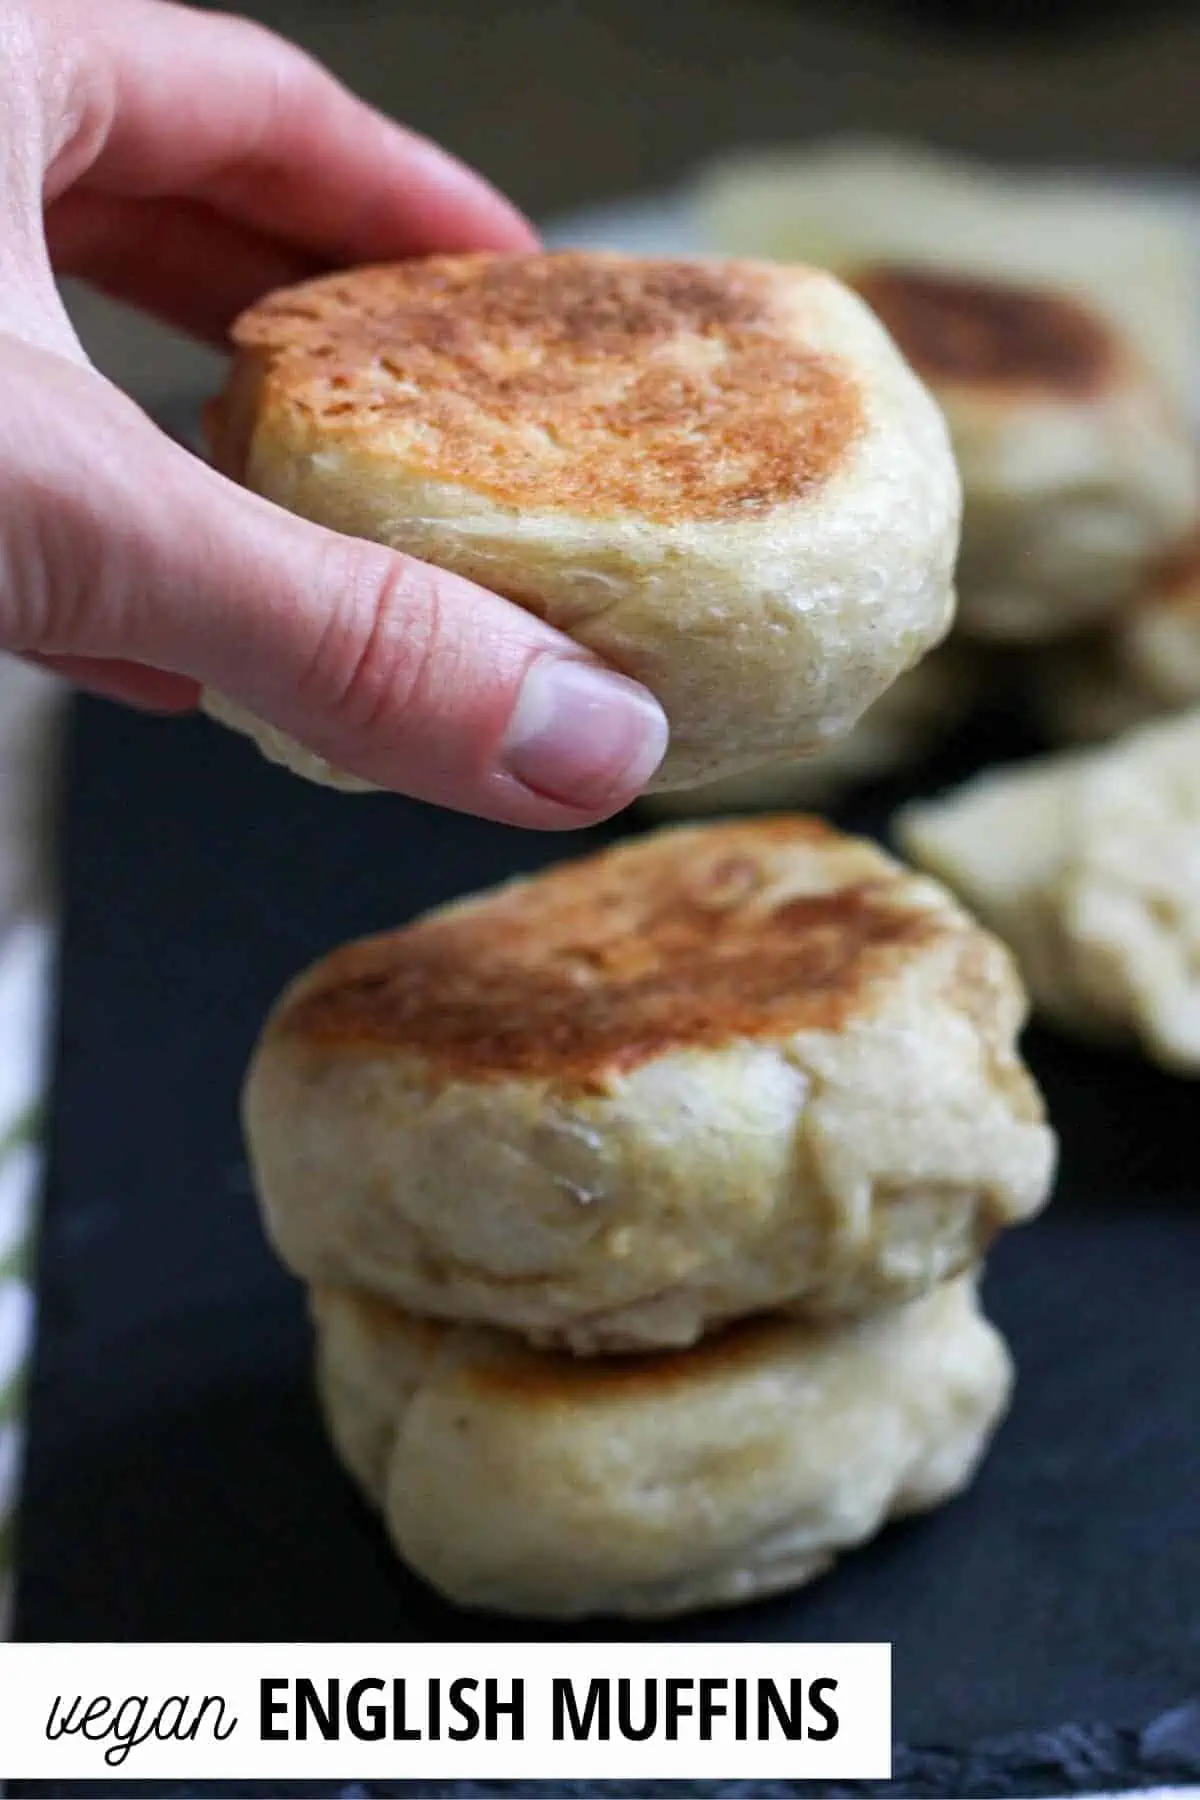 hand picking up an english muffin